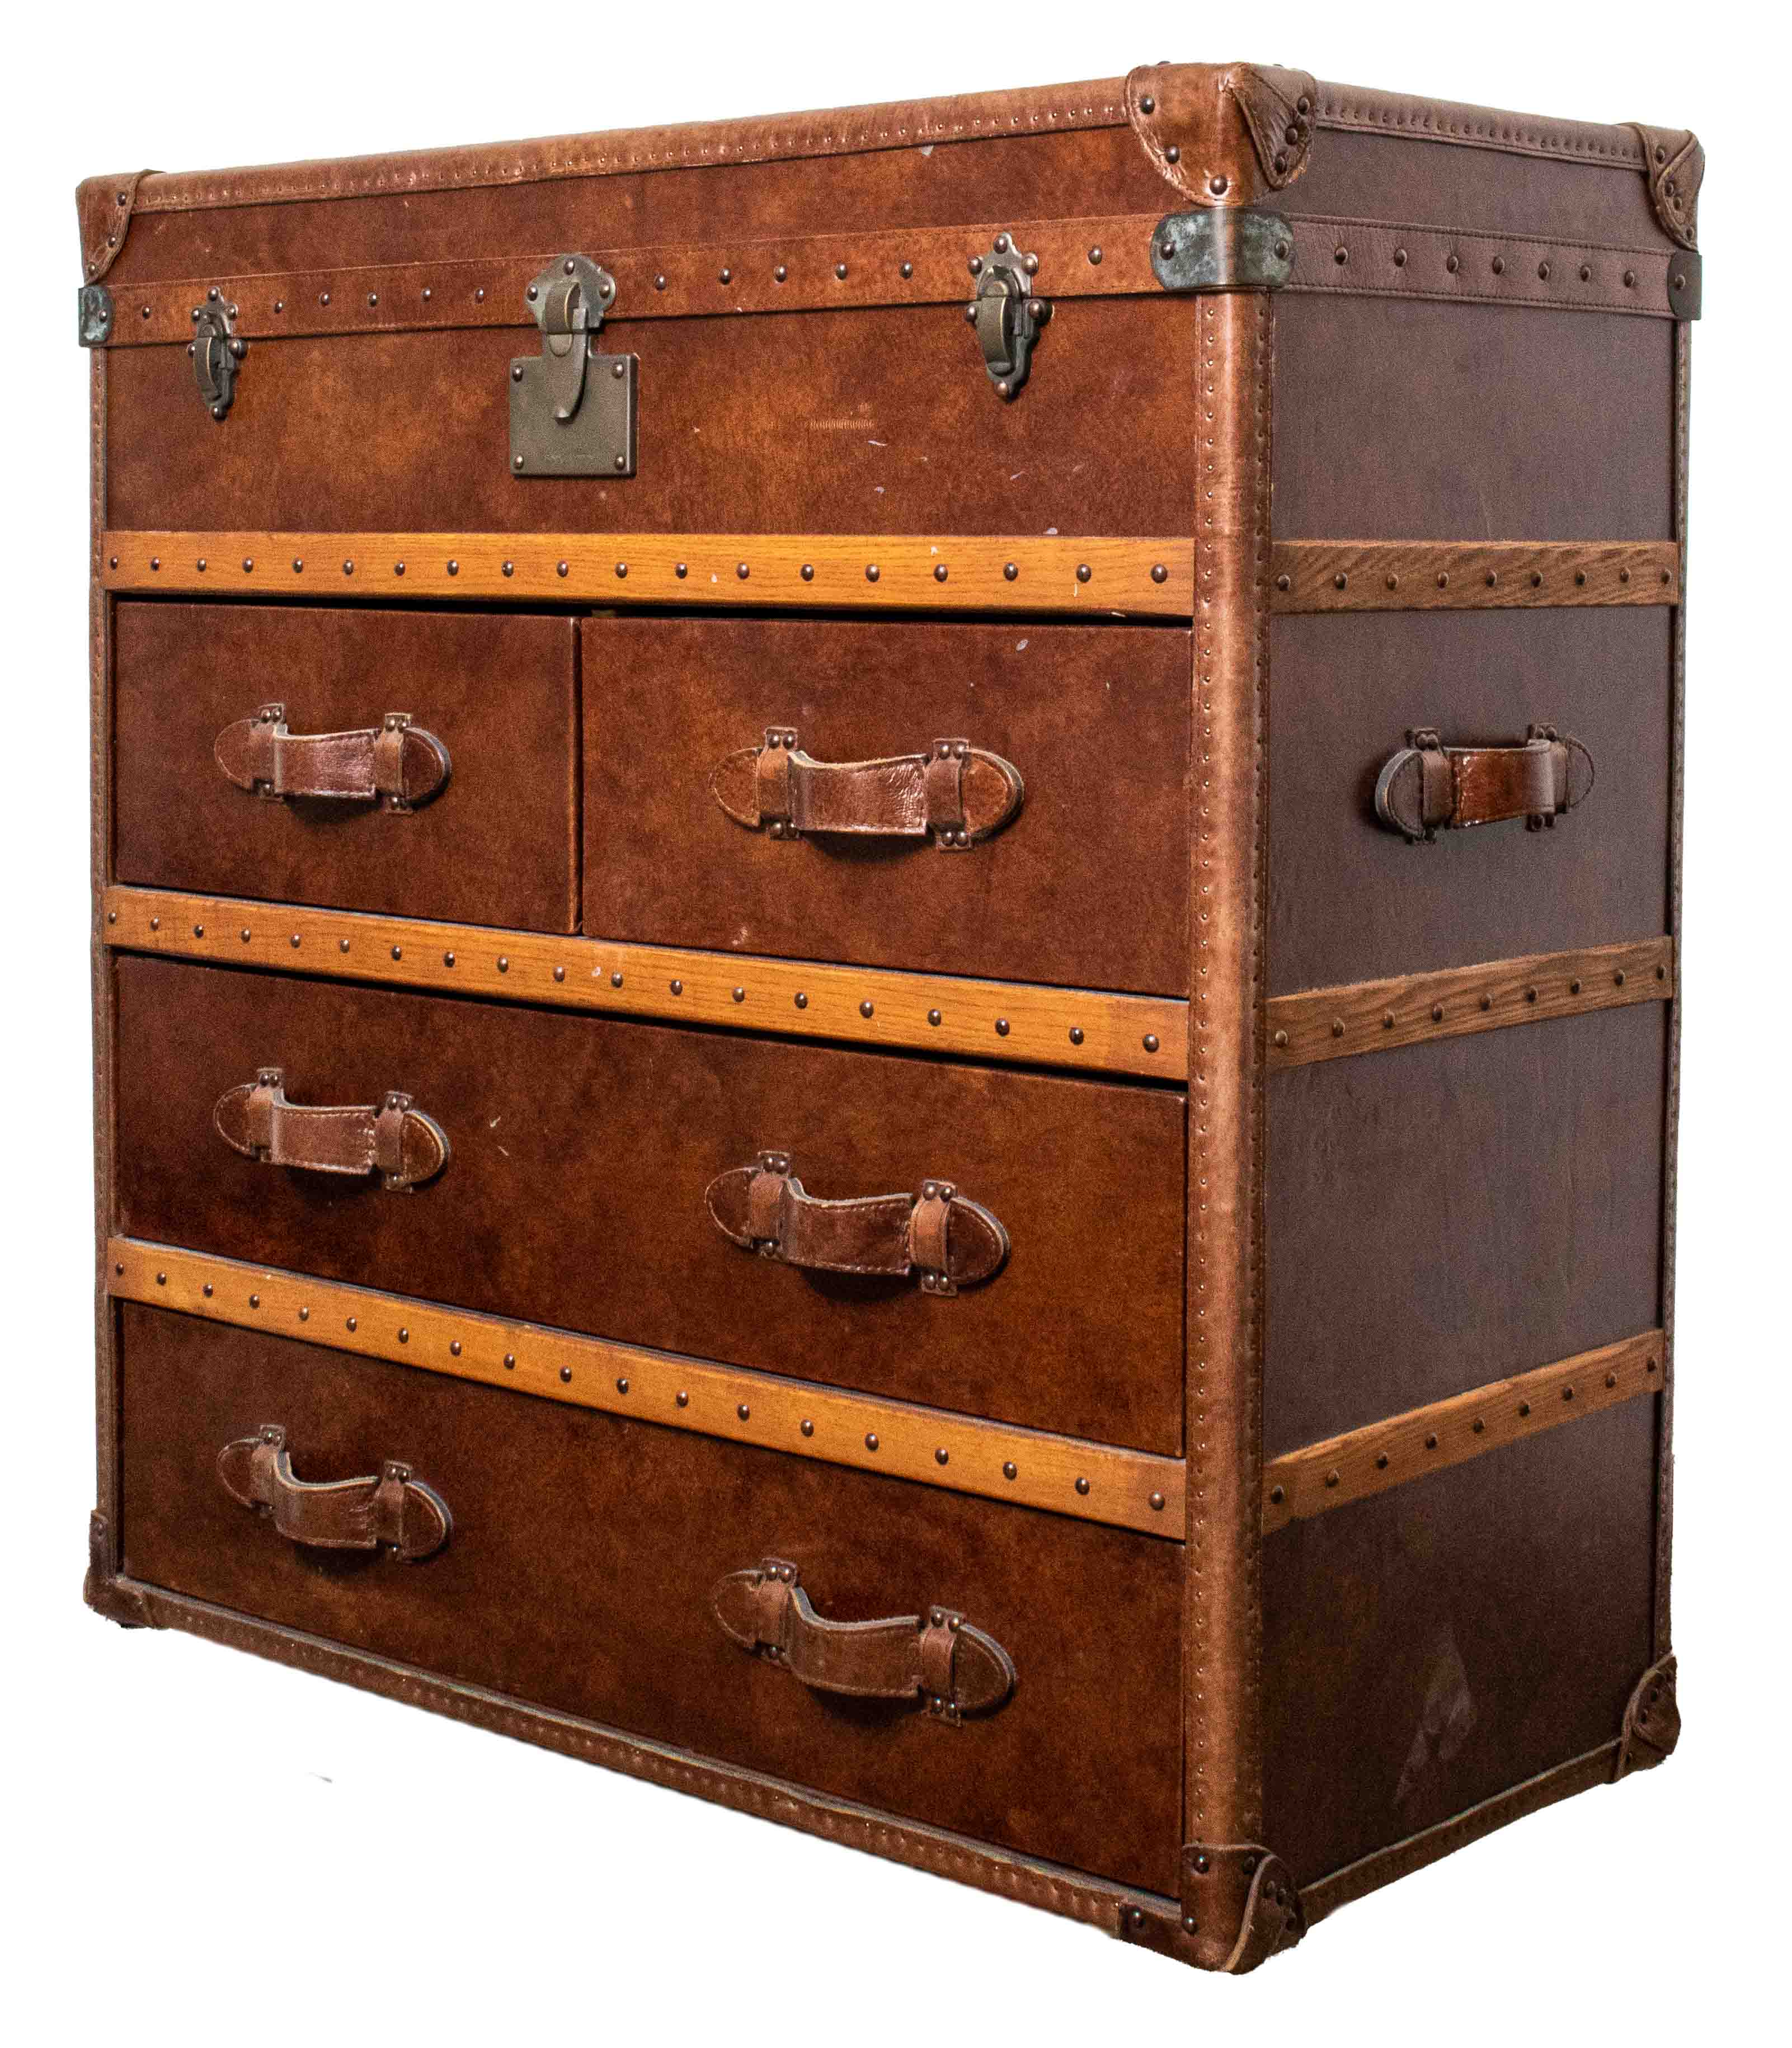 LEATHER BOUND STEAMER TRUNK CHEST 2d1c05